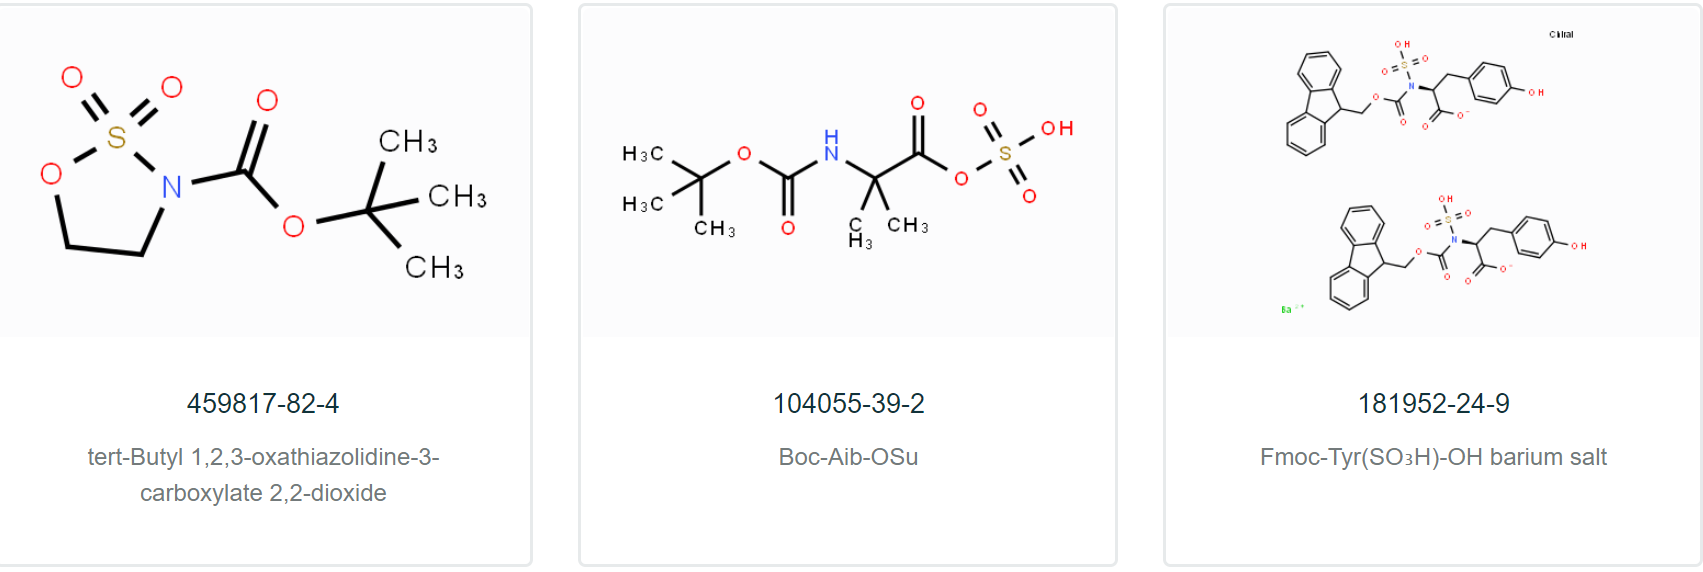 New Chemical Cyclobutane-1,2-dicarboxylic Anhydride Stocks CAS 4462-96-8 Repotrectinib Intermediate Manufacturer China